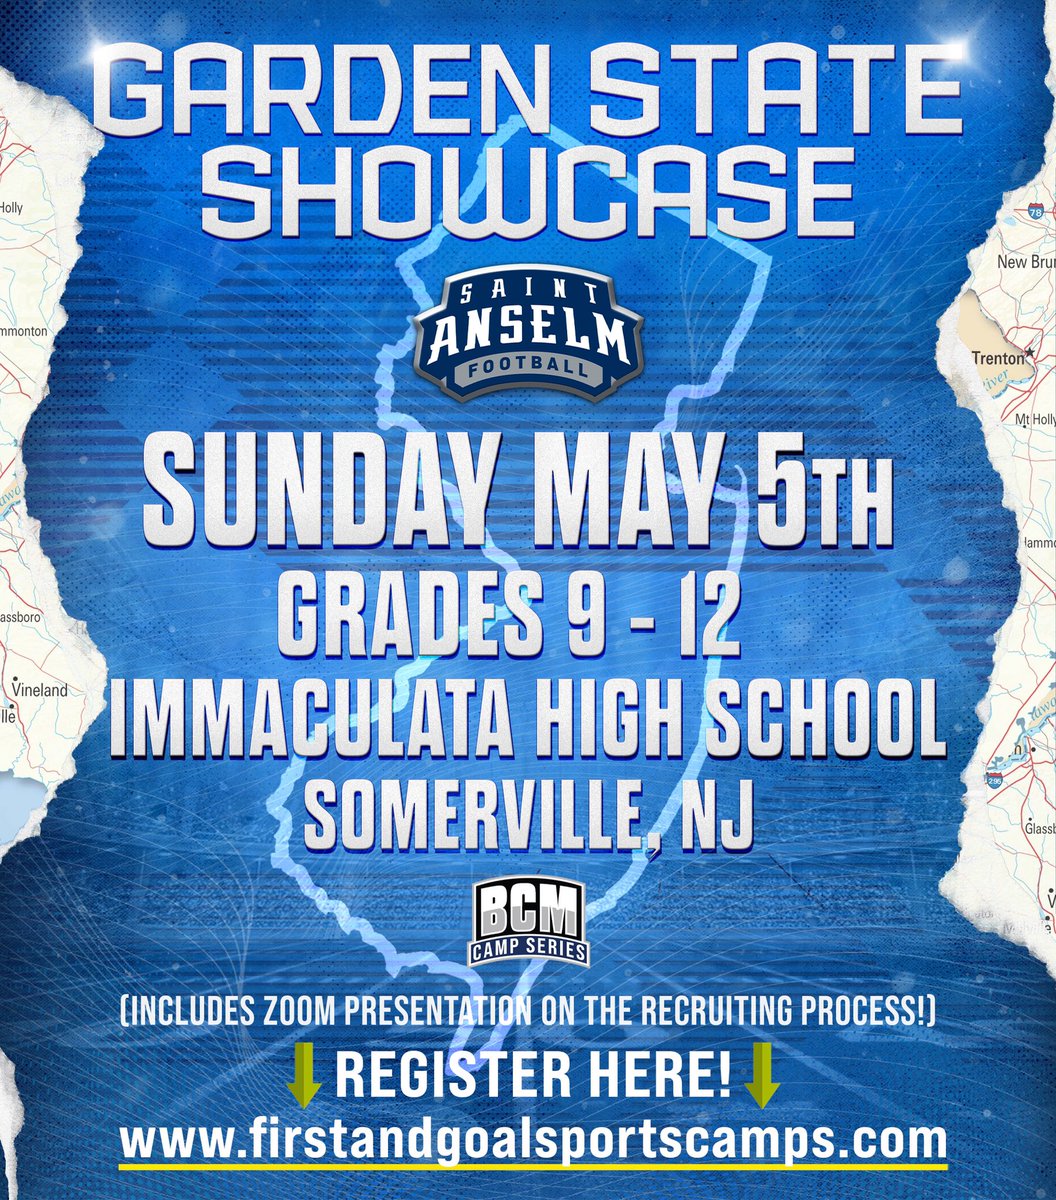 Next Sunday we are taking the #BCMCampSeries on the road to New Jersey. More opportunity for those prospects to show up and show out. If you are a high academic competitor, we want to see you! Register at: firstandgoalsportscamps.com